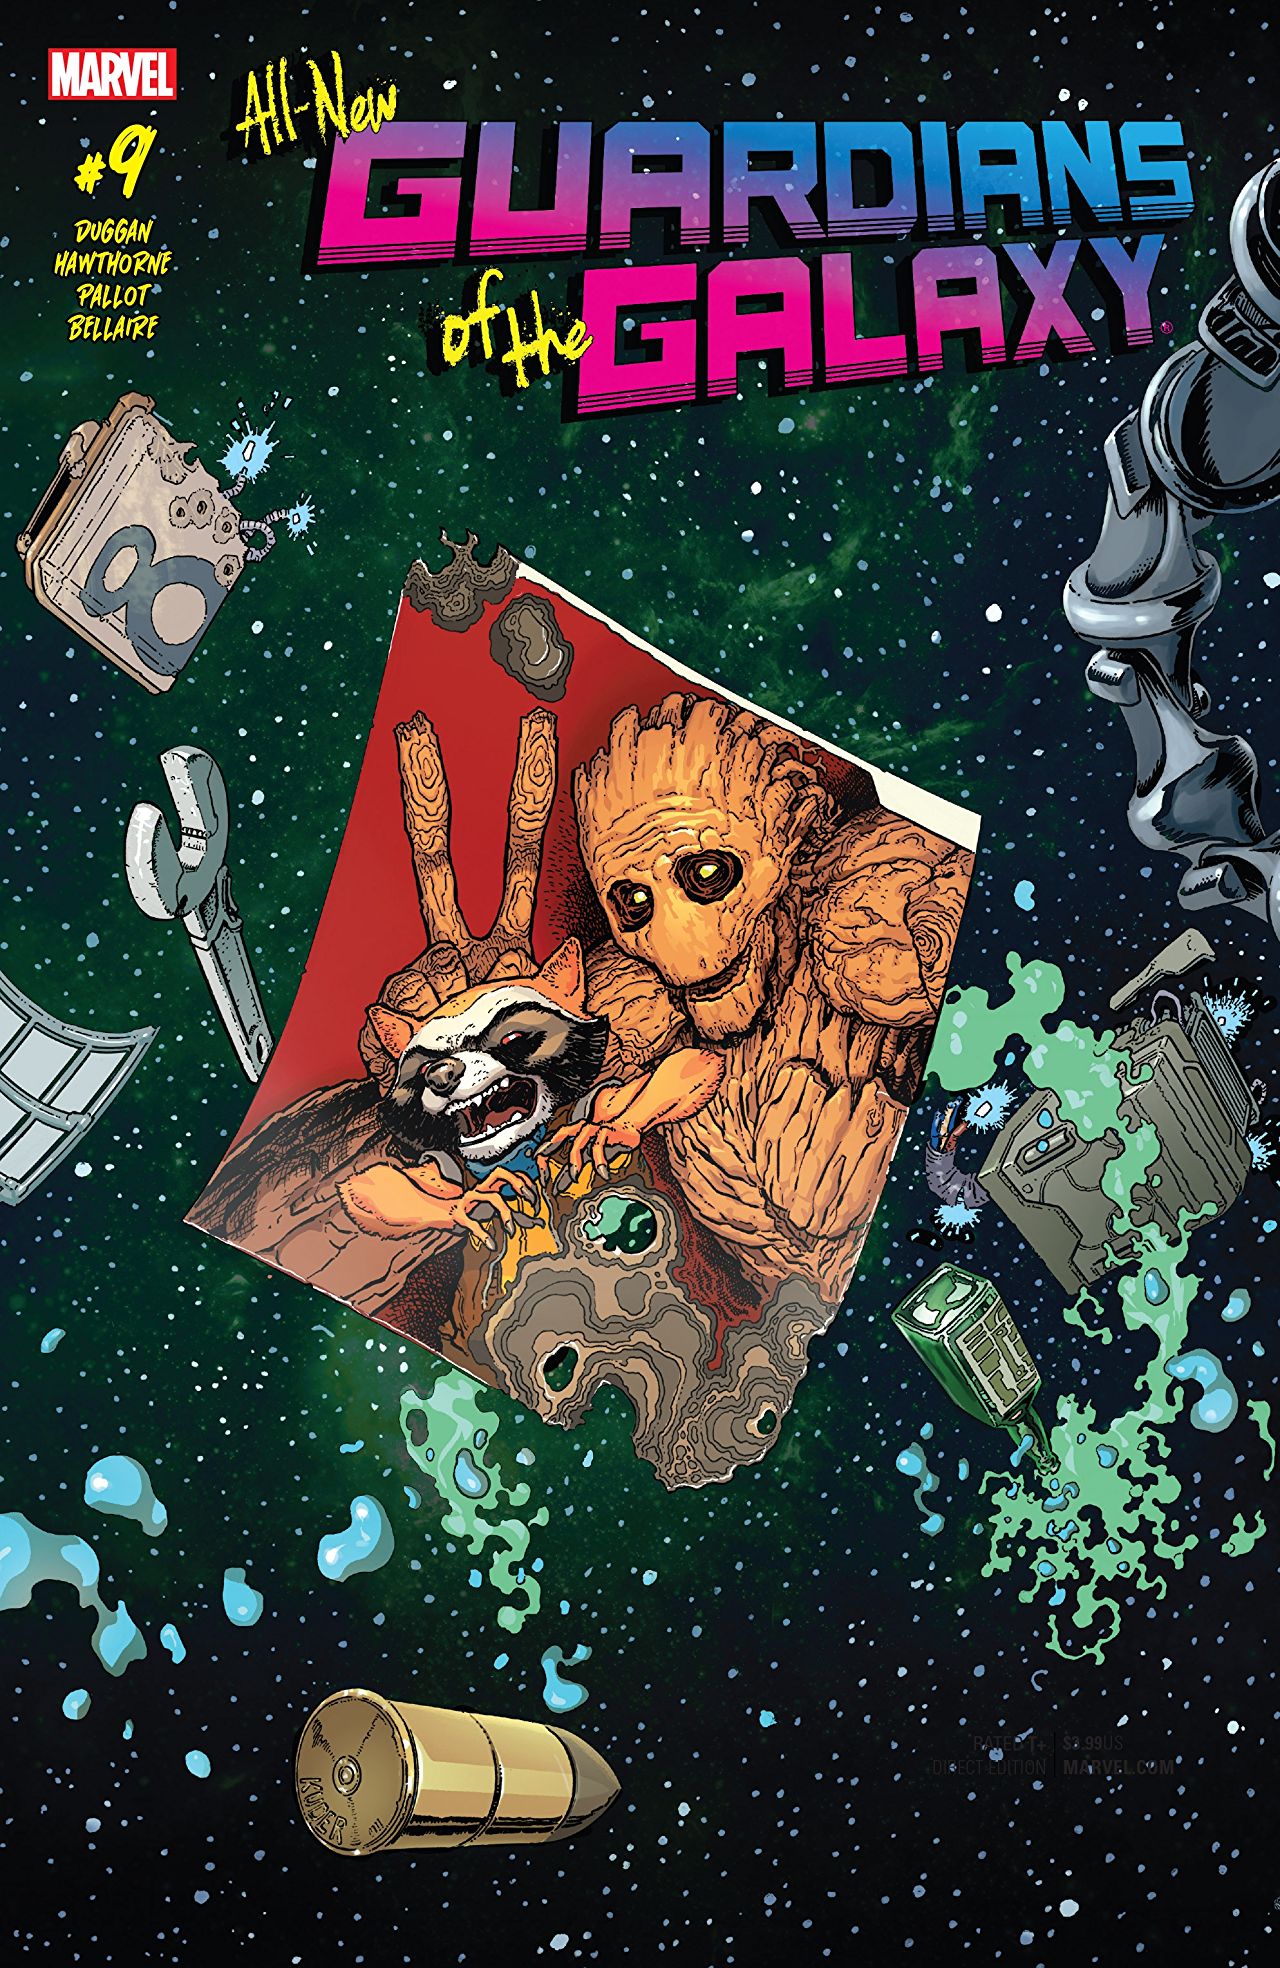 All-New Guardians Of The Galaxy #9 Review